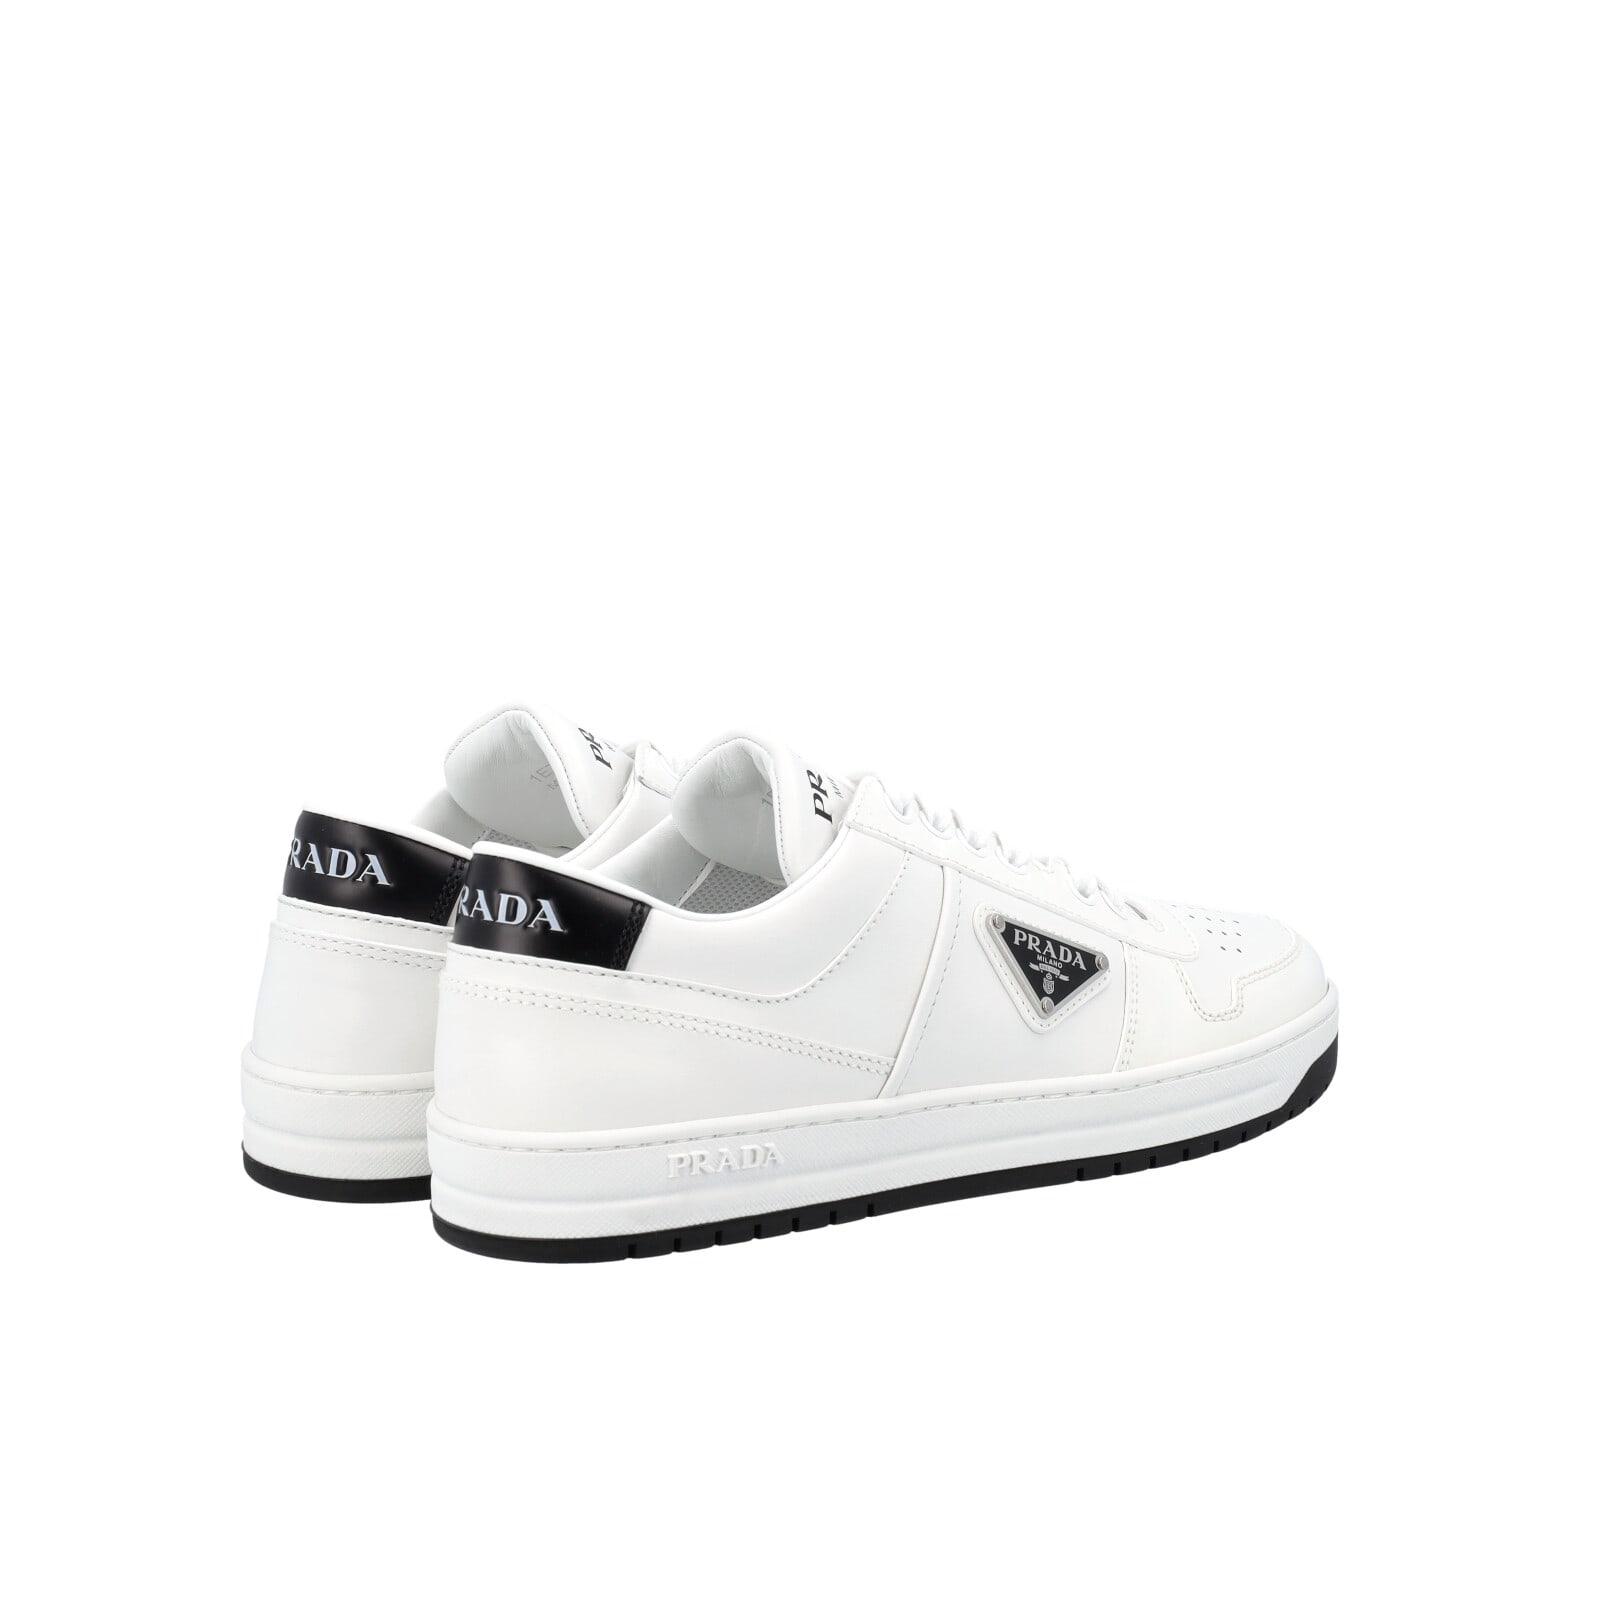 Prada Perforated Leather Sneakers in White/Black (White) - Lyst